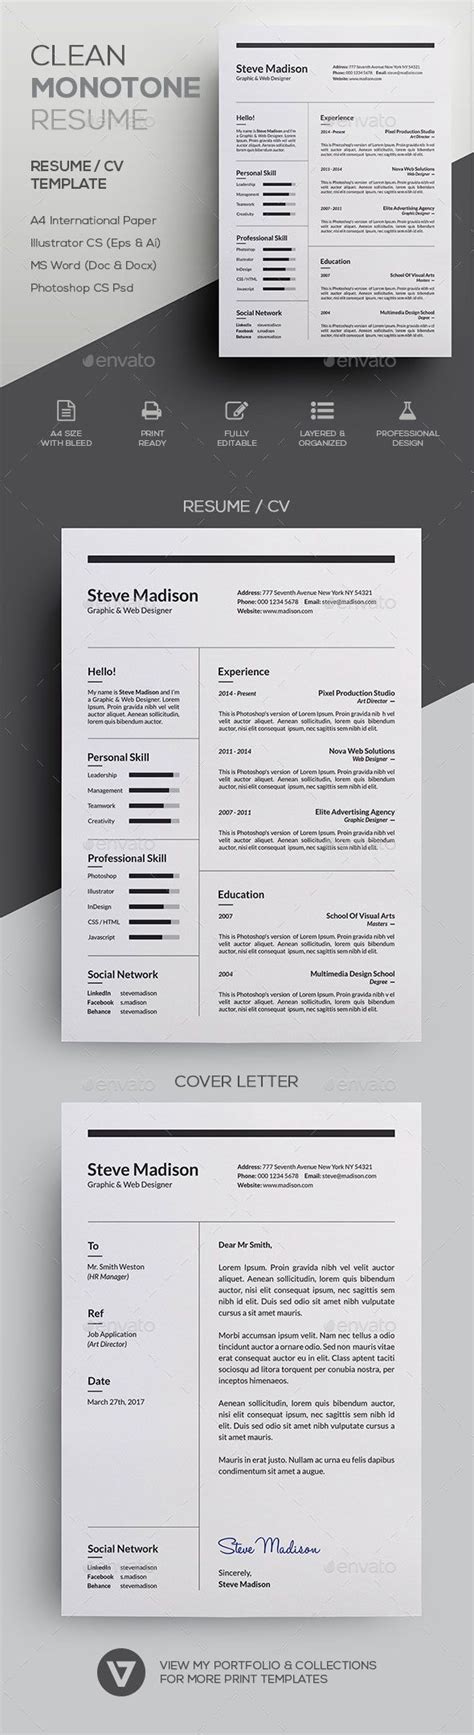 Clean Monotone Resume Cv Template A Simple And Neat Resume Is All You